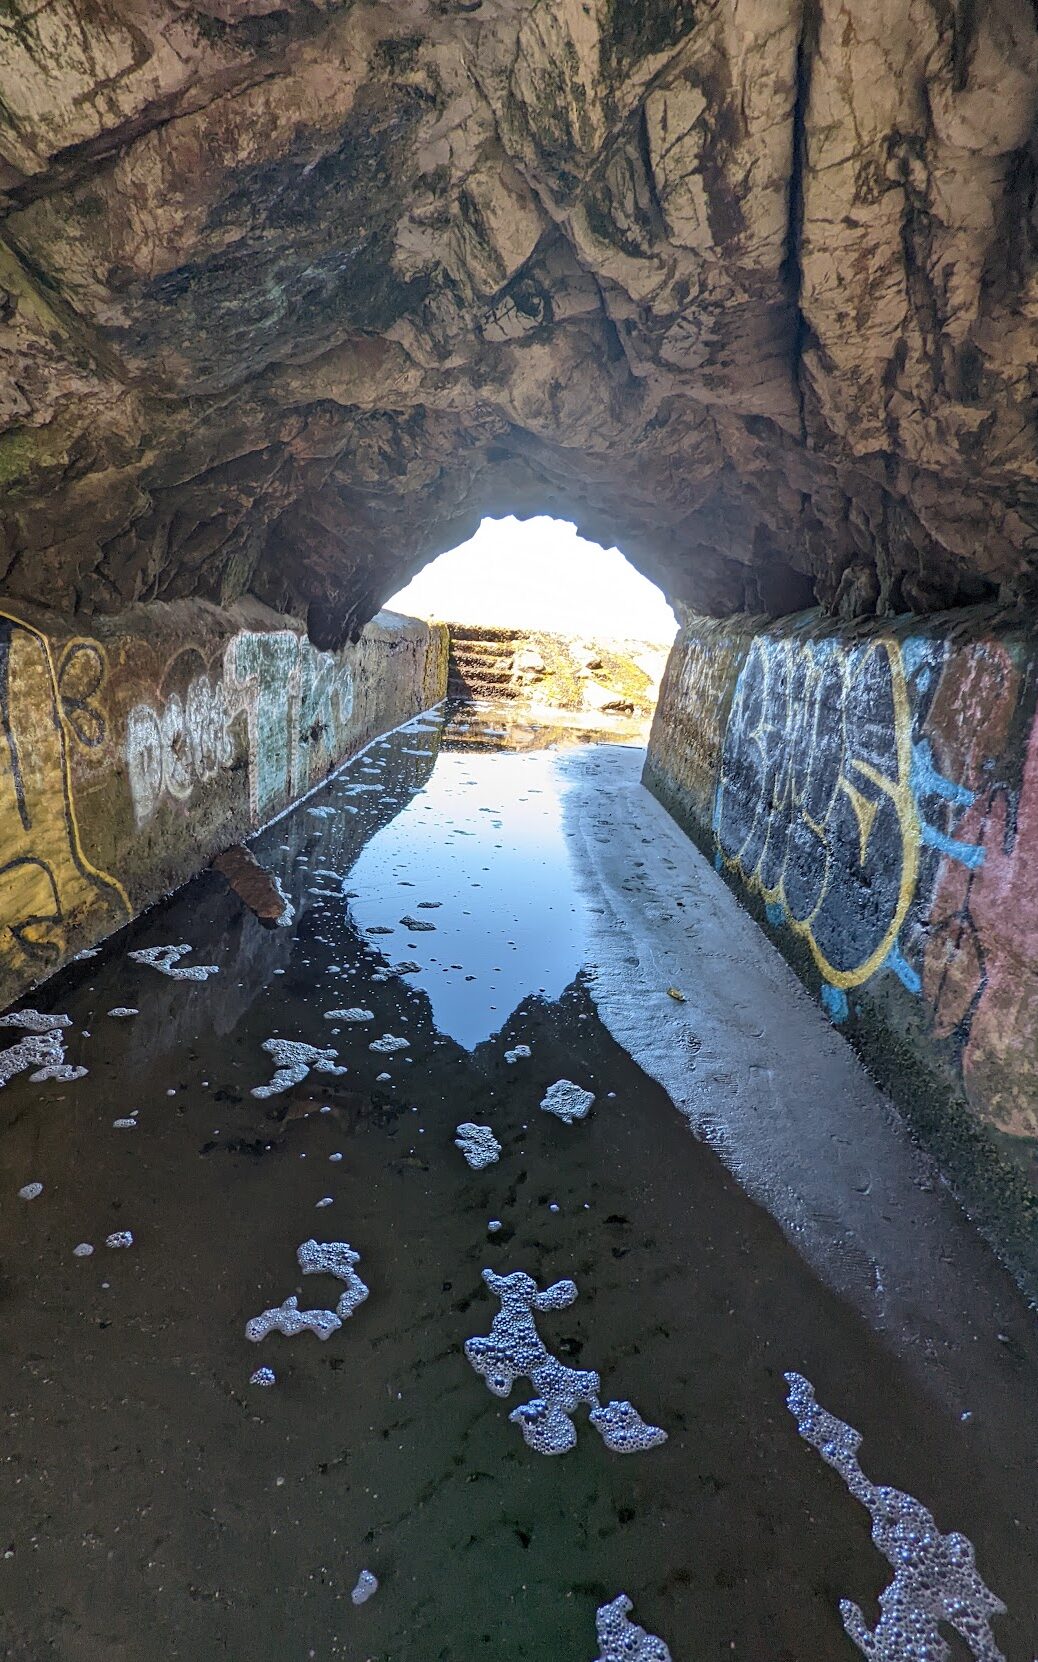 A picture of a tunnel with light on the other side. Graffiti lines the walls of the tunnel and there is water on the ground.